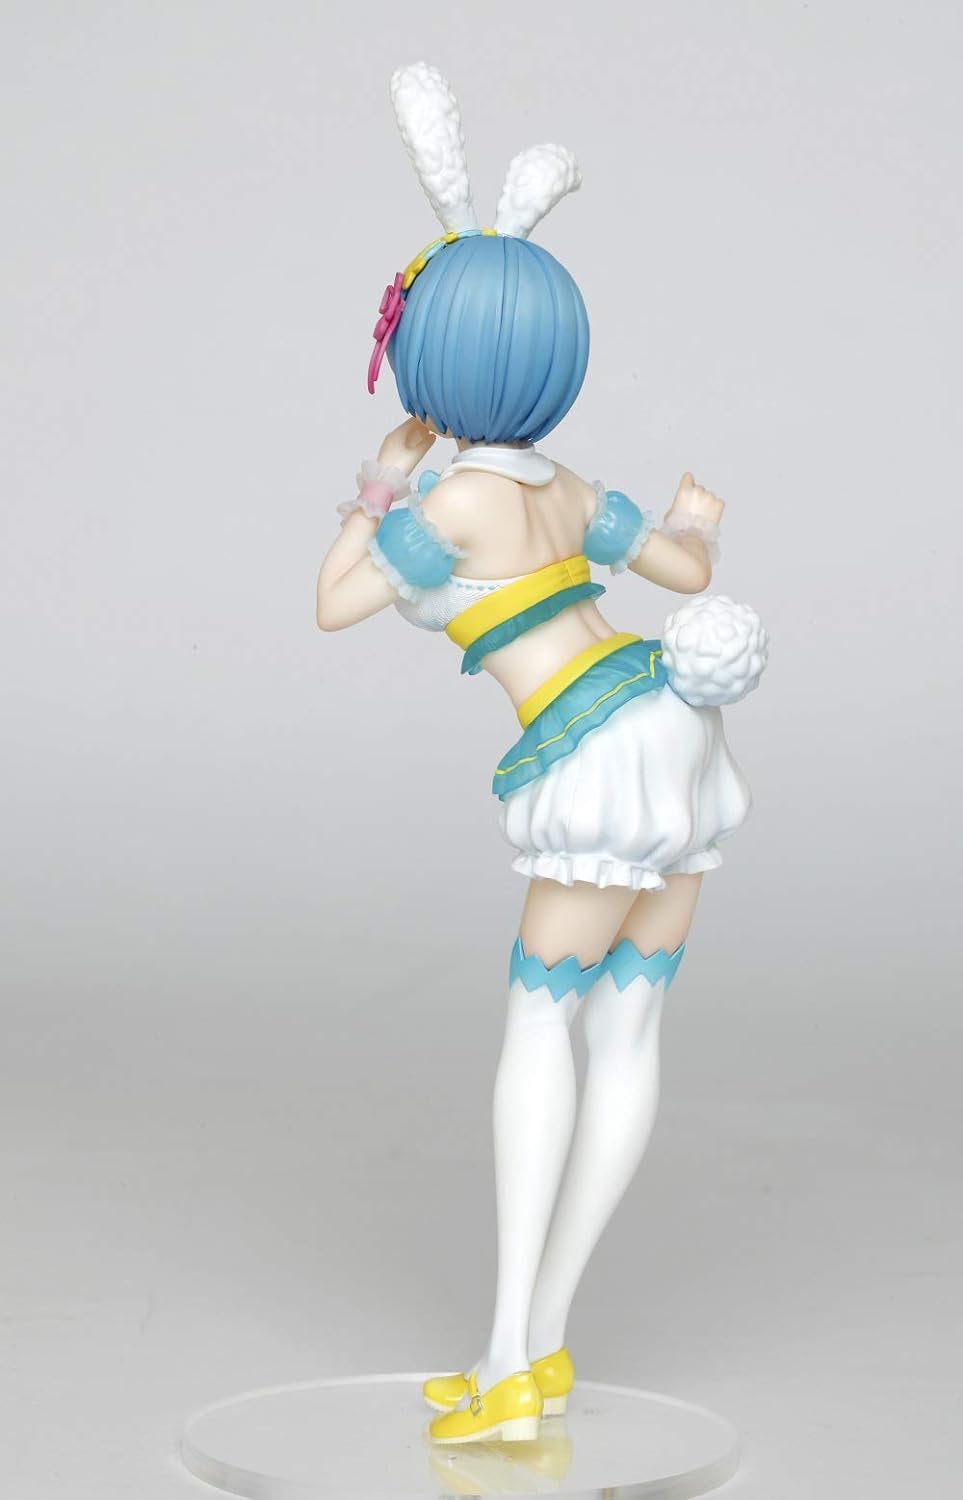 Re:Zero - Starting Life in Another World - Precious Figures - Rem - Happy Easter! Ver. | animota